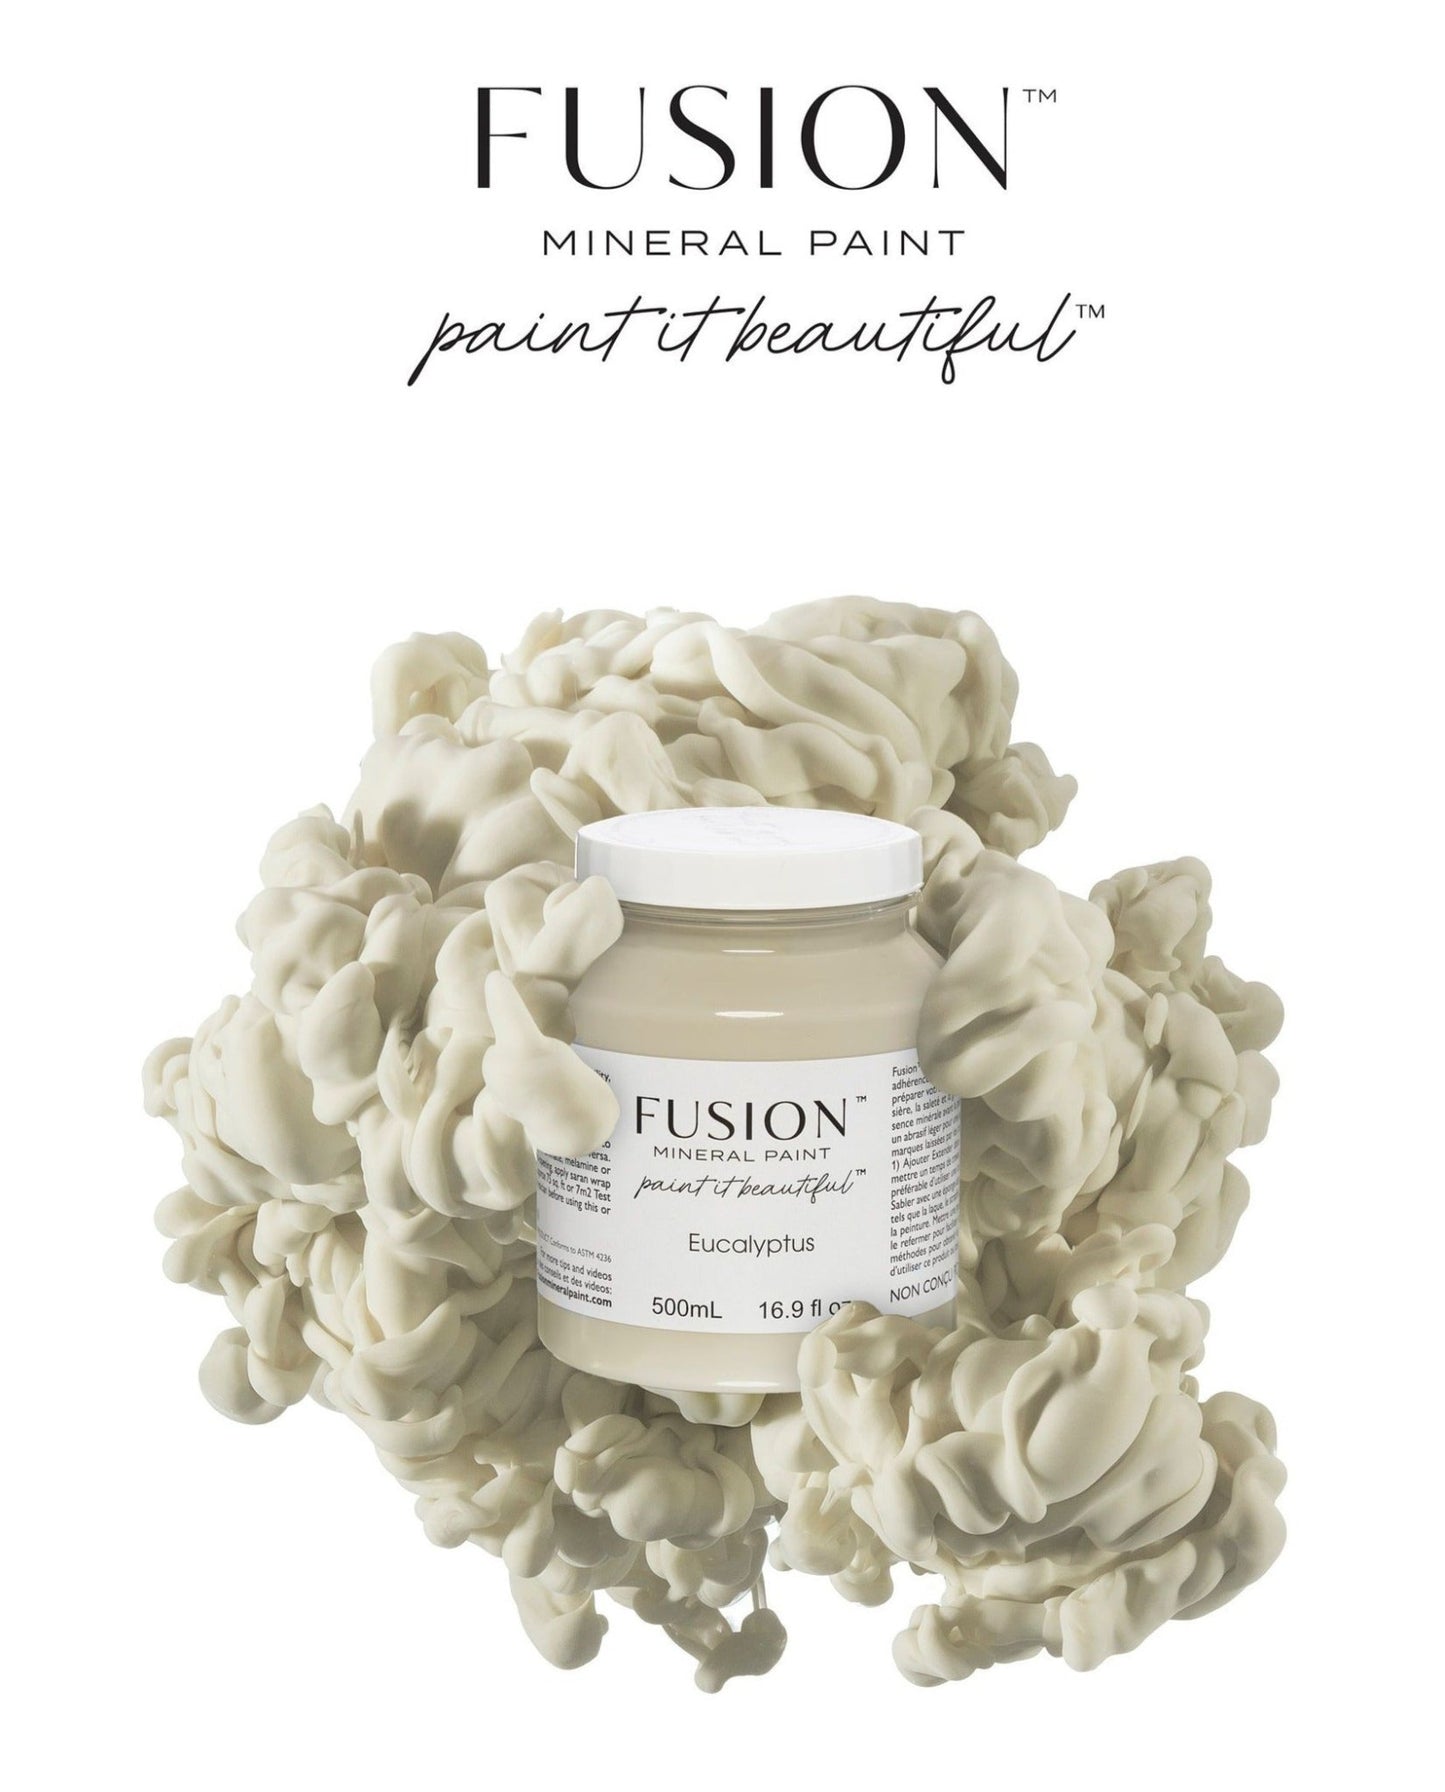 Fusion Mineral Paint - Eucalyptus - Rustic River Home